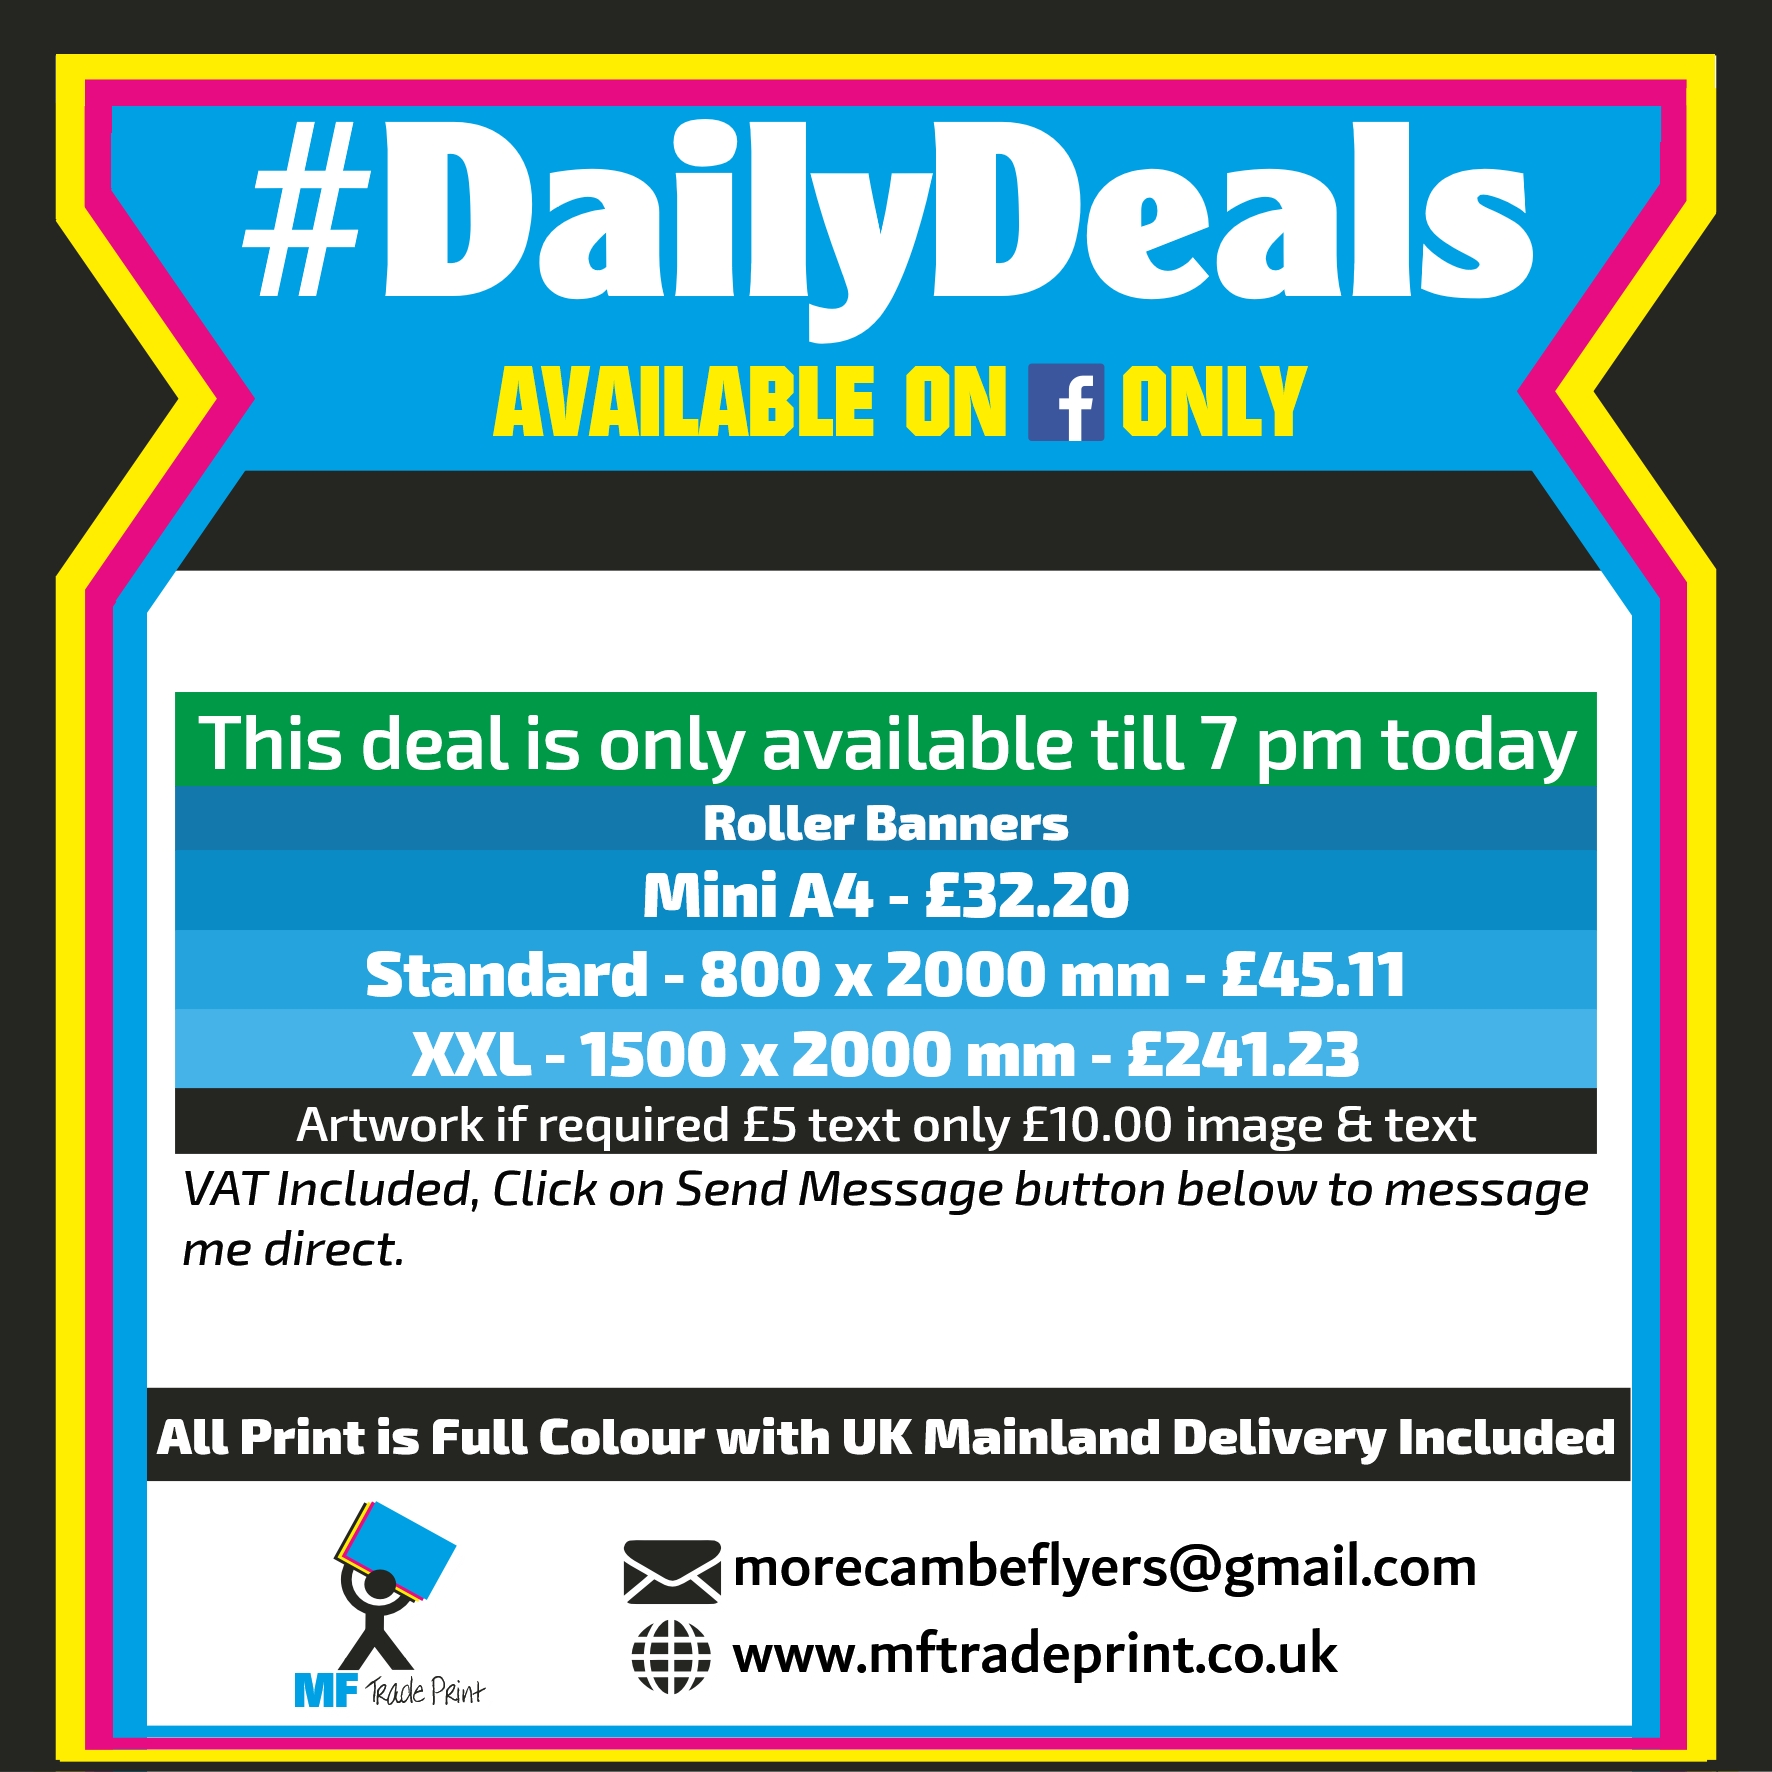 #dailydeals roller banners full colour printed